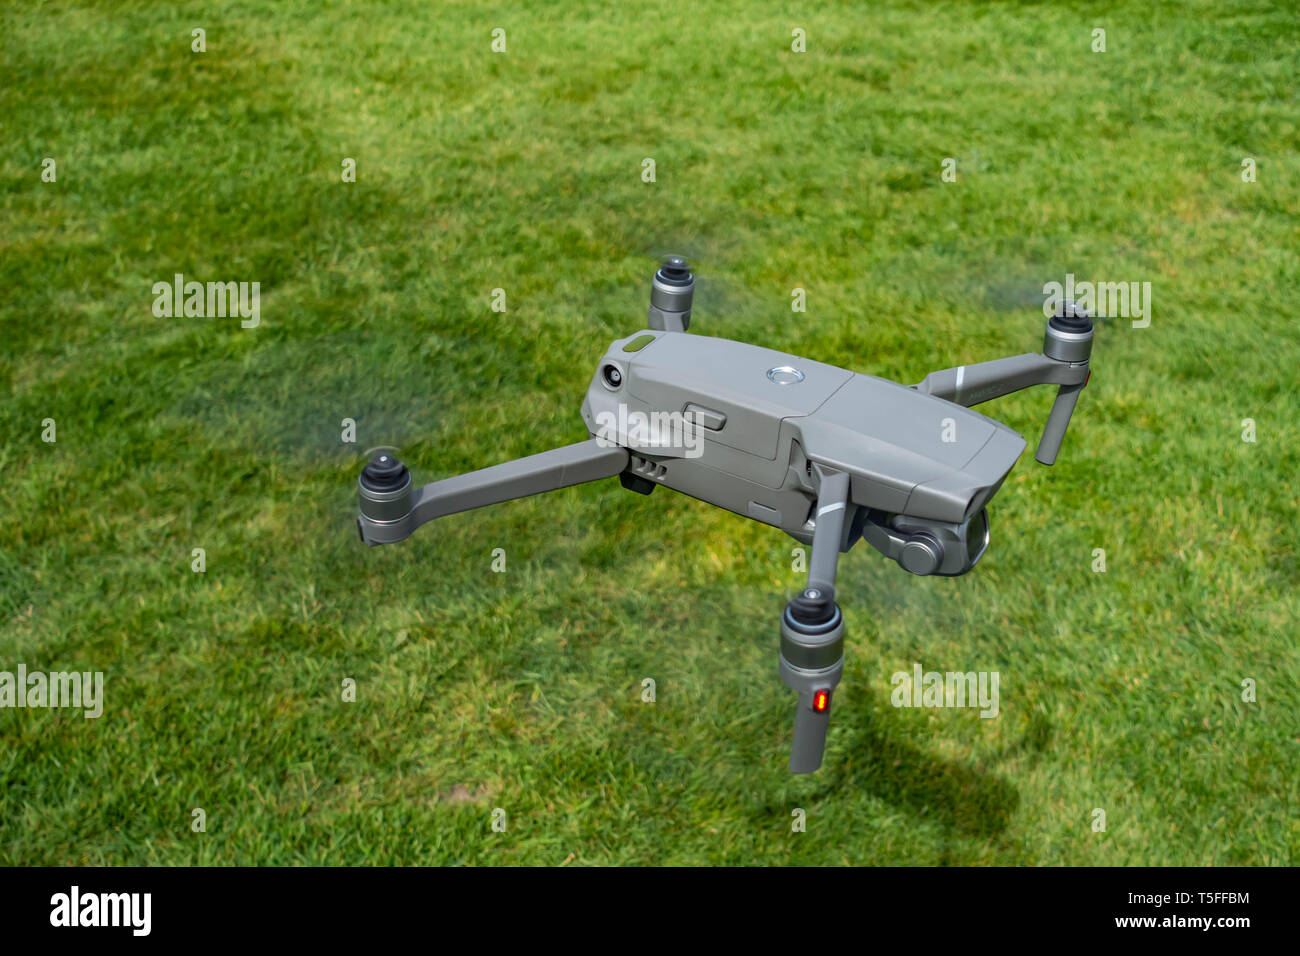 Birds eye view looking down onto a flying DJI Mavic 2 PRO personal Drone flying very low near to the ground Stock Photo